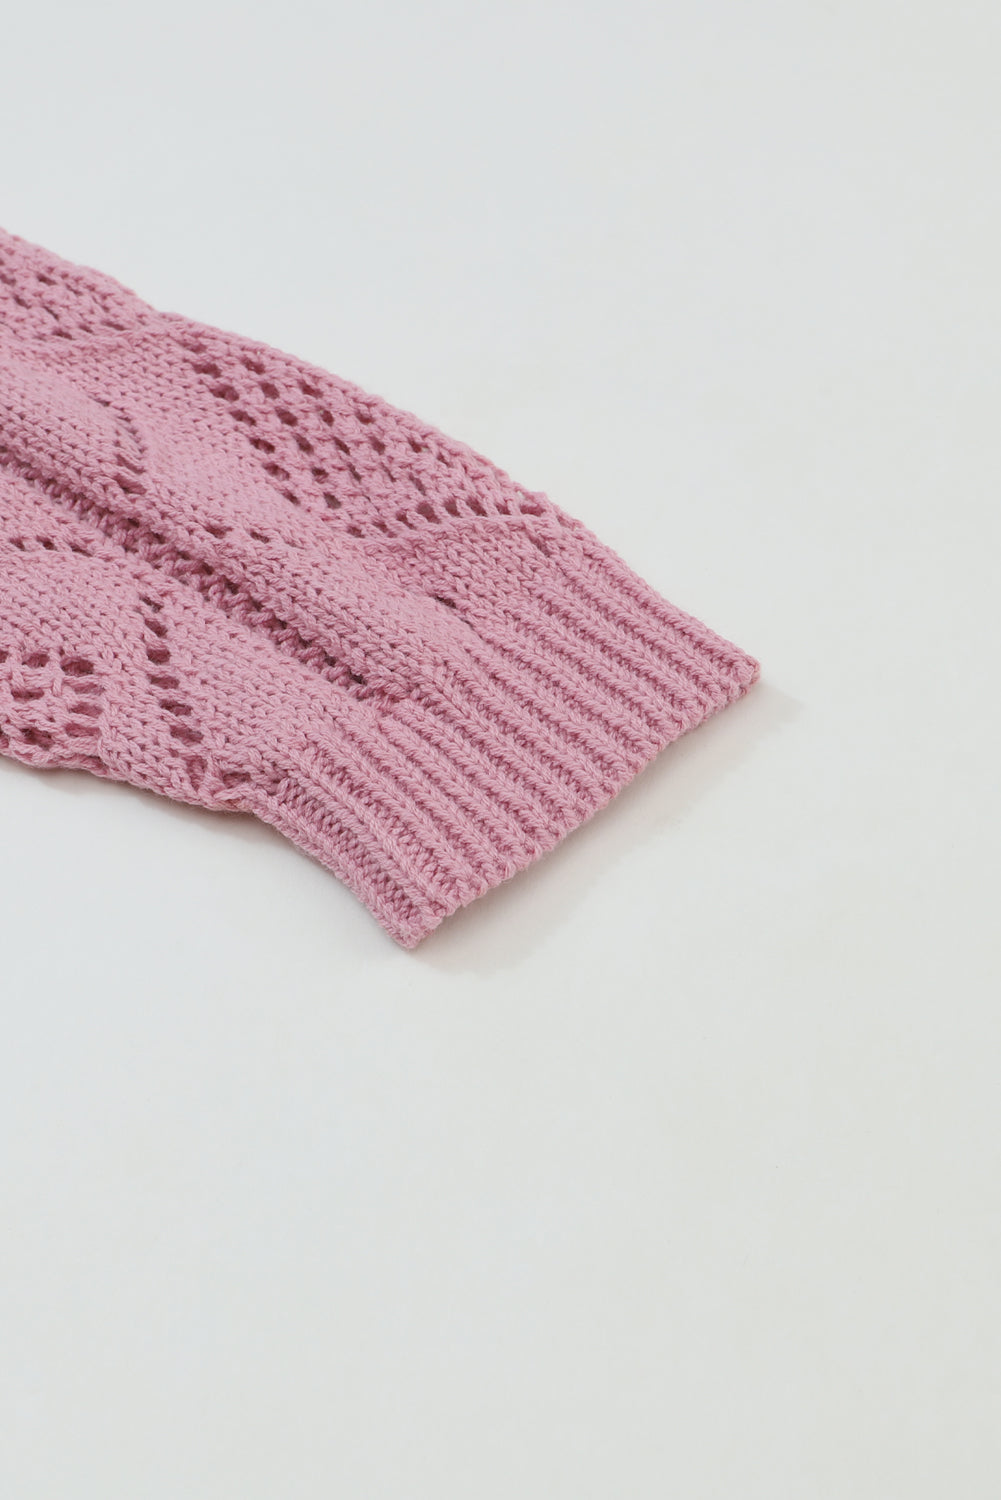 Pink Hollow-out Openwork Knit Cardigan